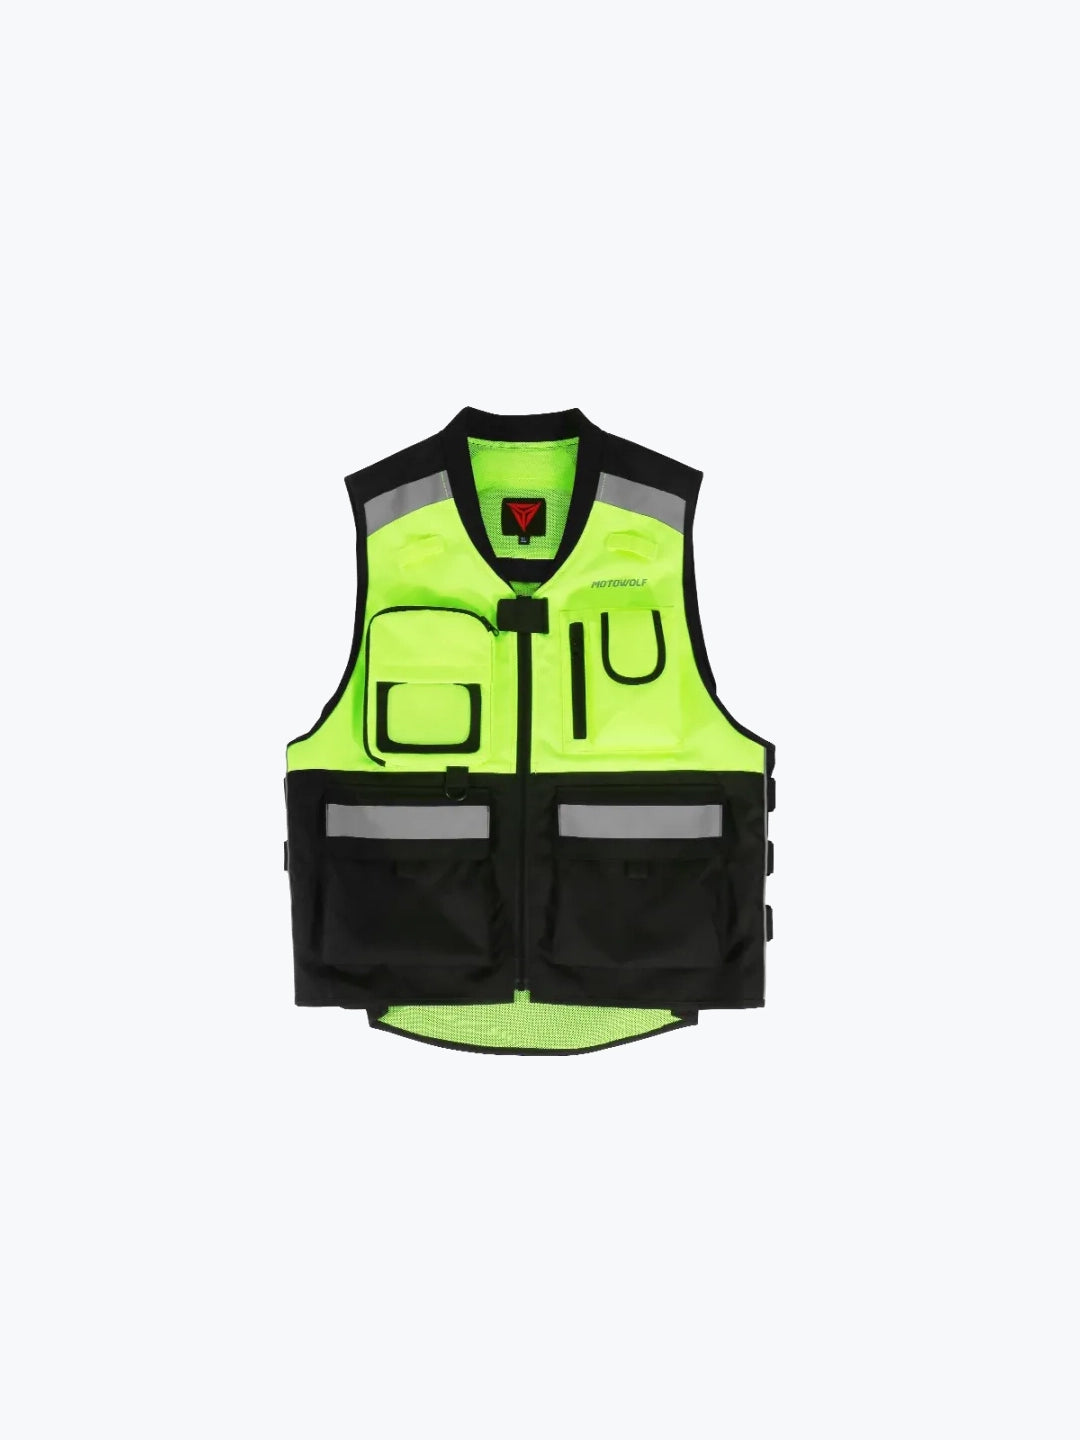 Motowolf Vest With Out Pad Black Green 0504